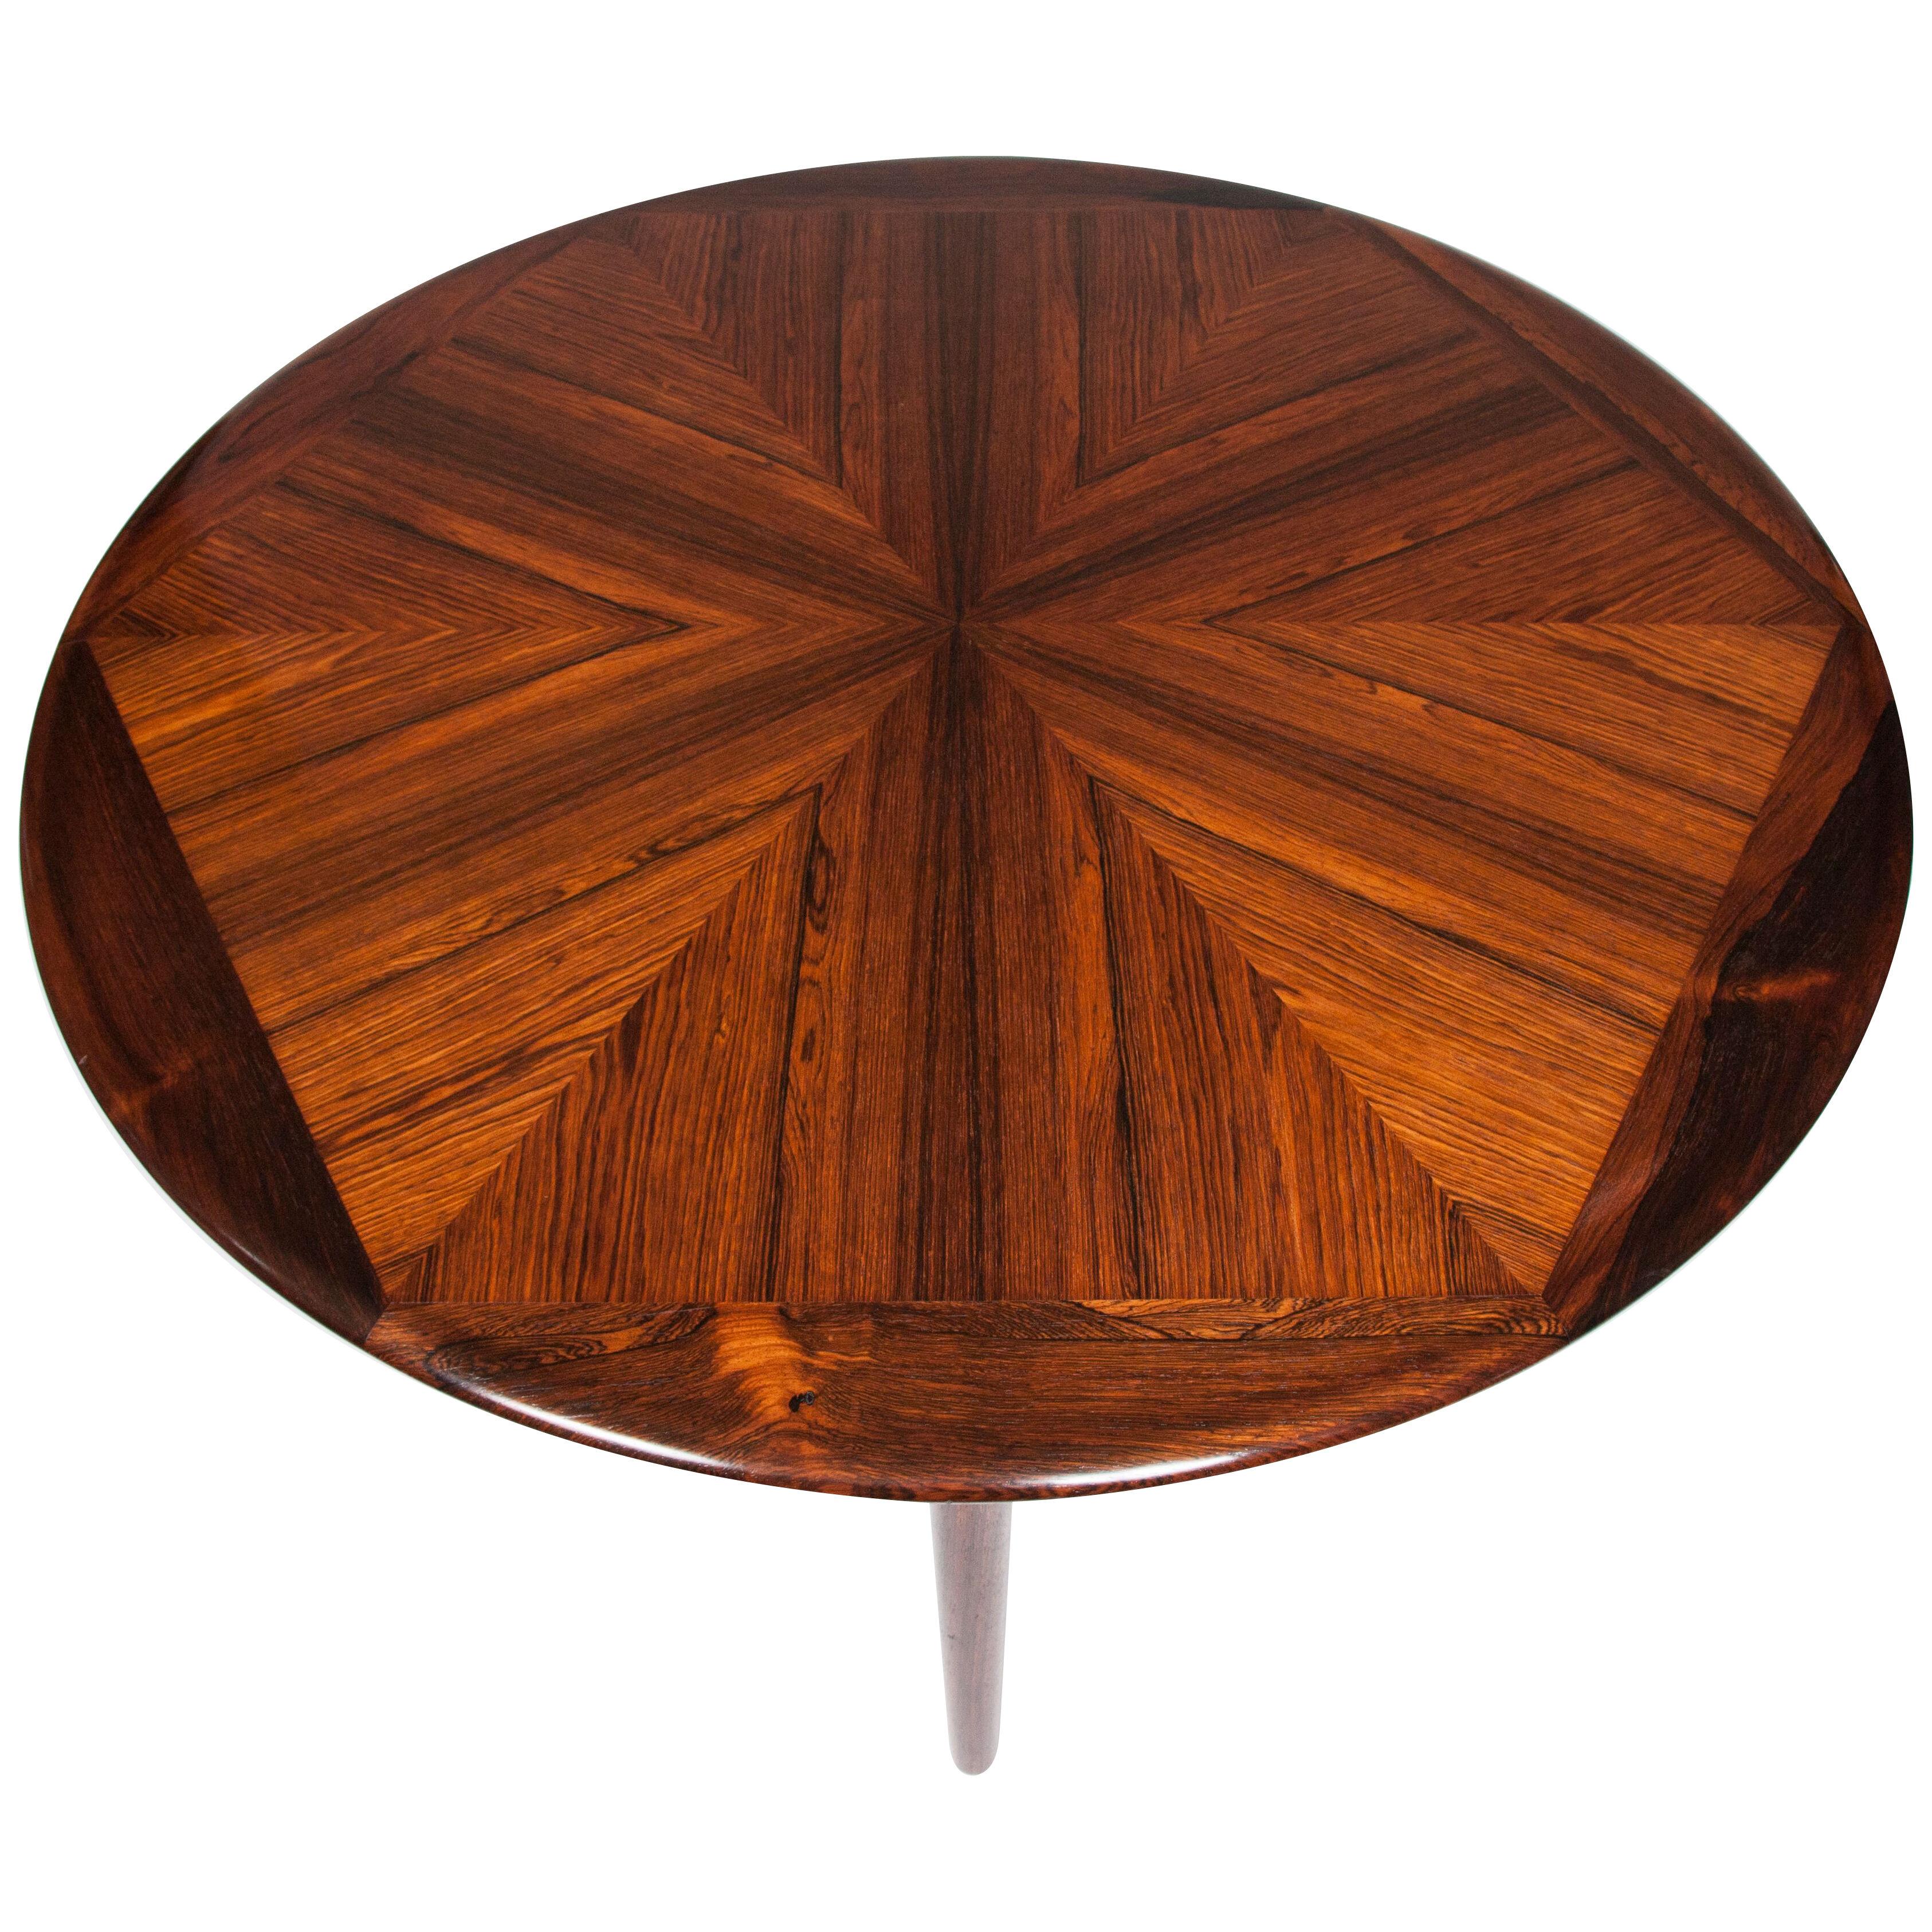 Circular rosewood low table designed by Henry Klein